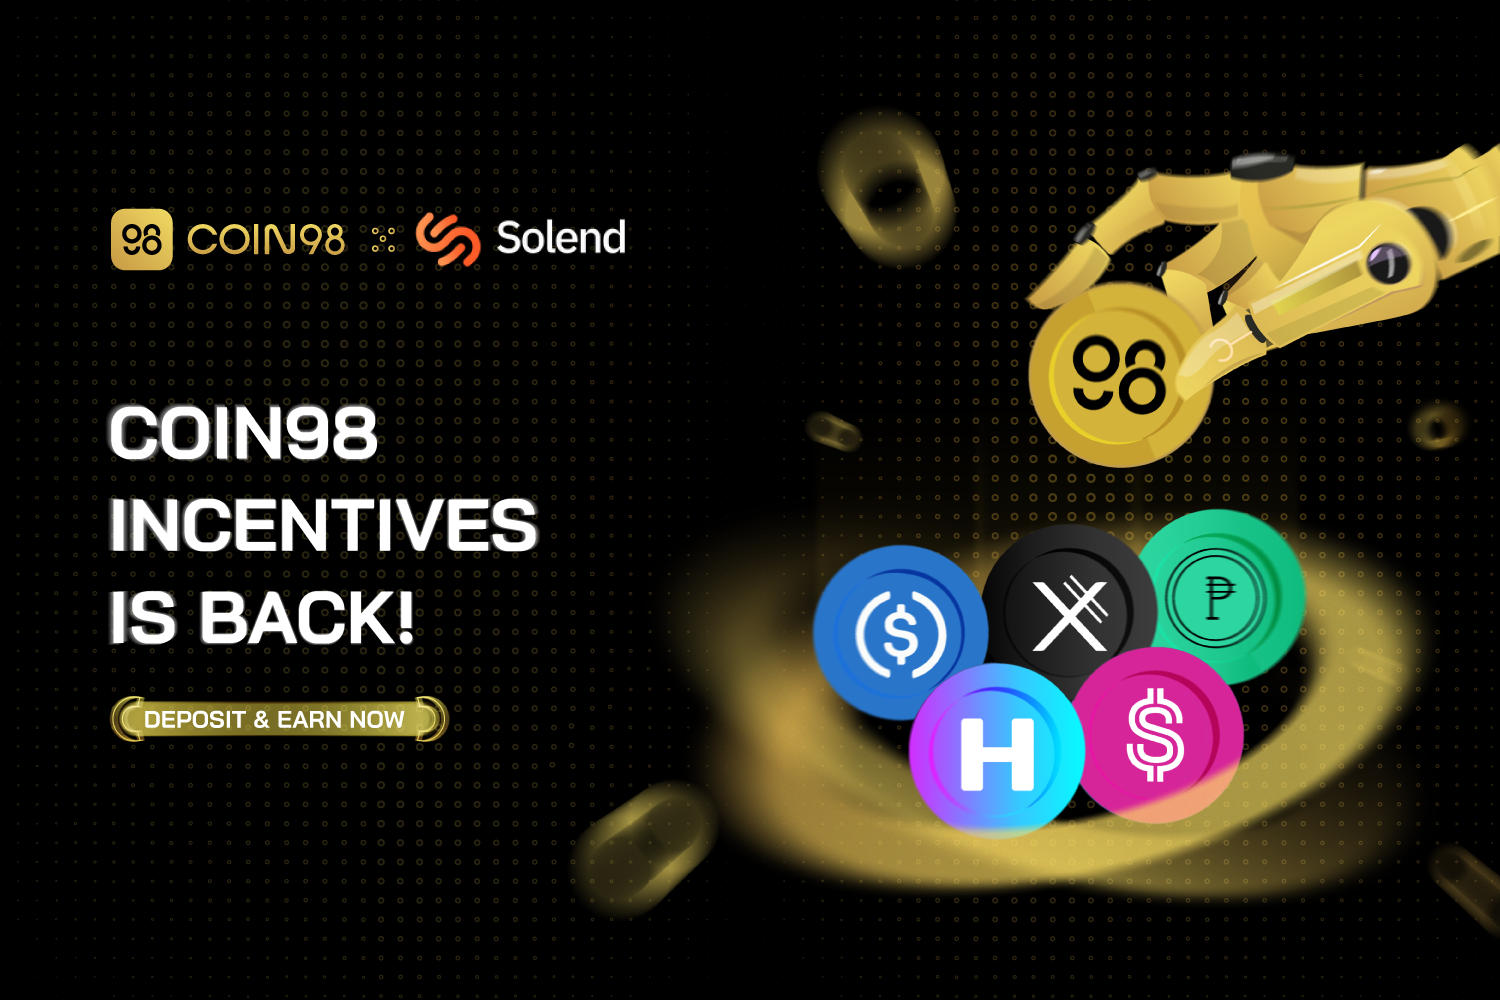 Coin98 Pool on Solend is back with 150,000 C98 incentives!